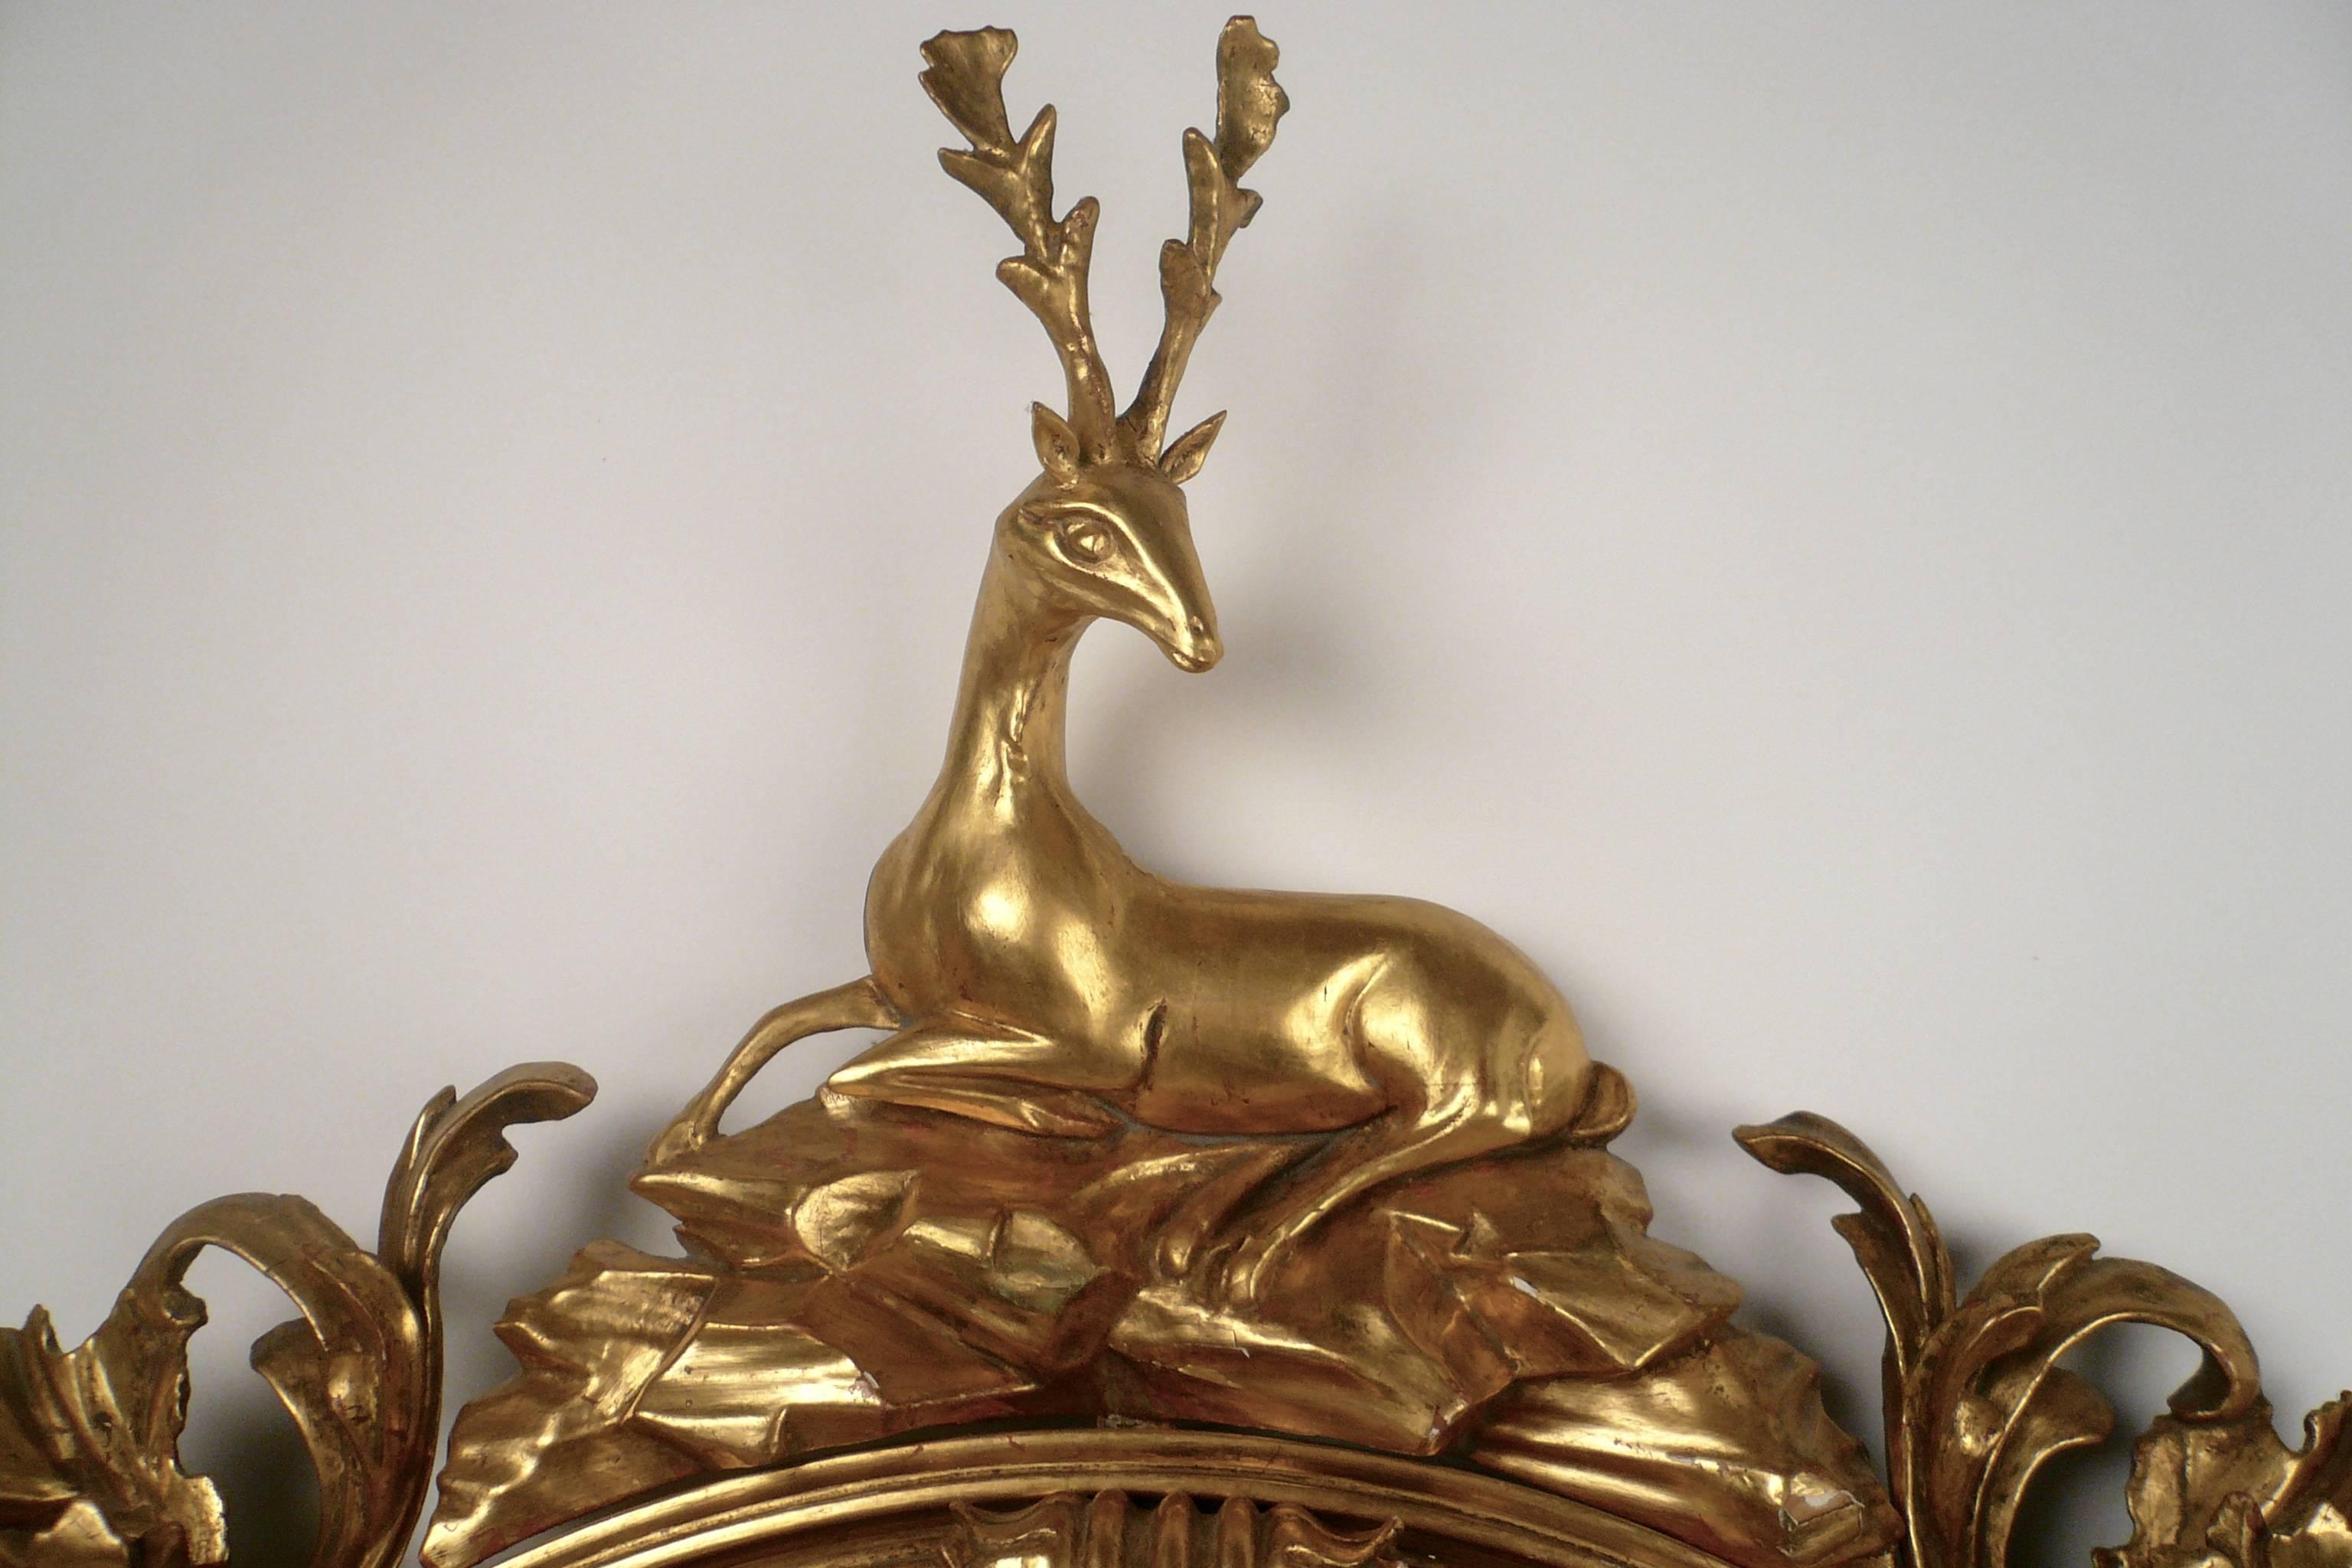 This fine early 19th century carved and gilded girandole mirror still retains Thomas Fentham's trade label. Affixed with candle arms ending in gilt-metal nozzles, the mirror is surmounted by a stag seated upon rockery. 
Examples of Fentham's work